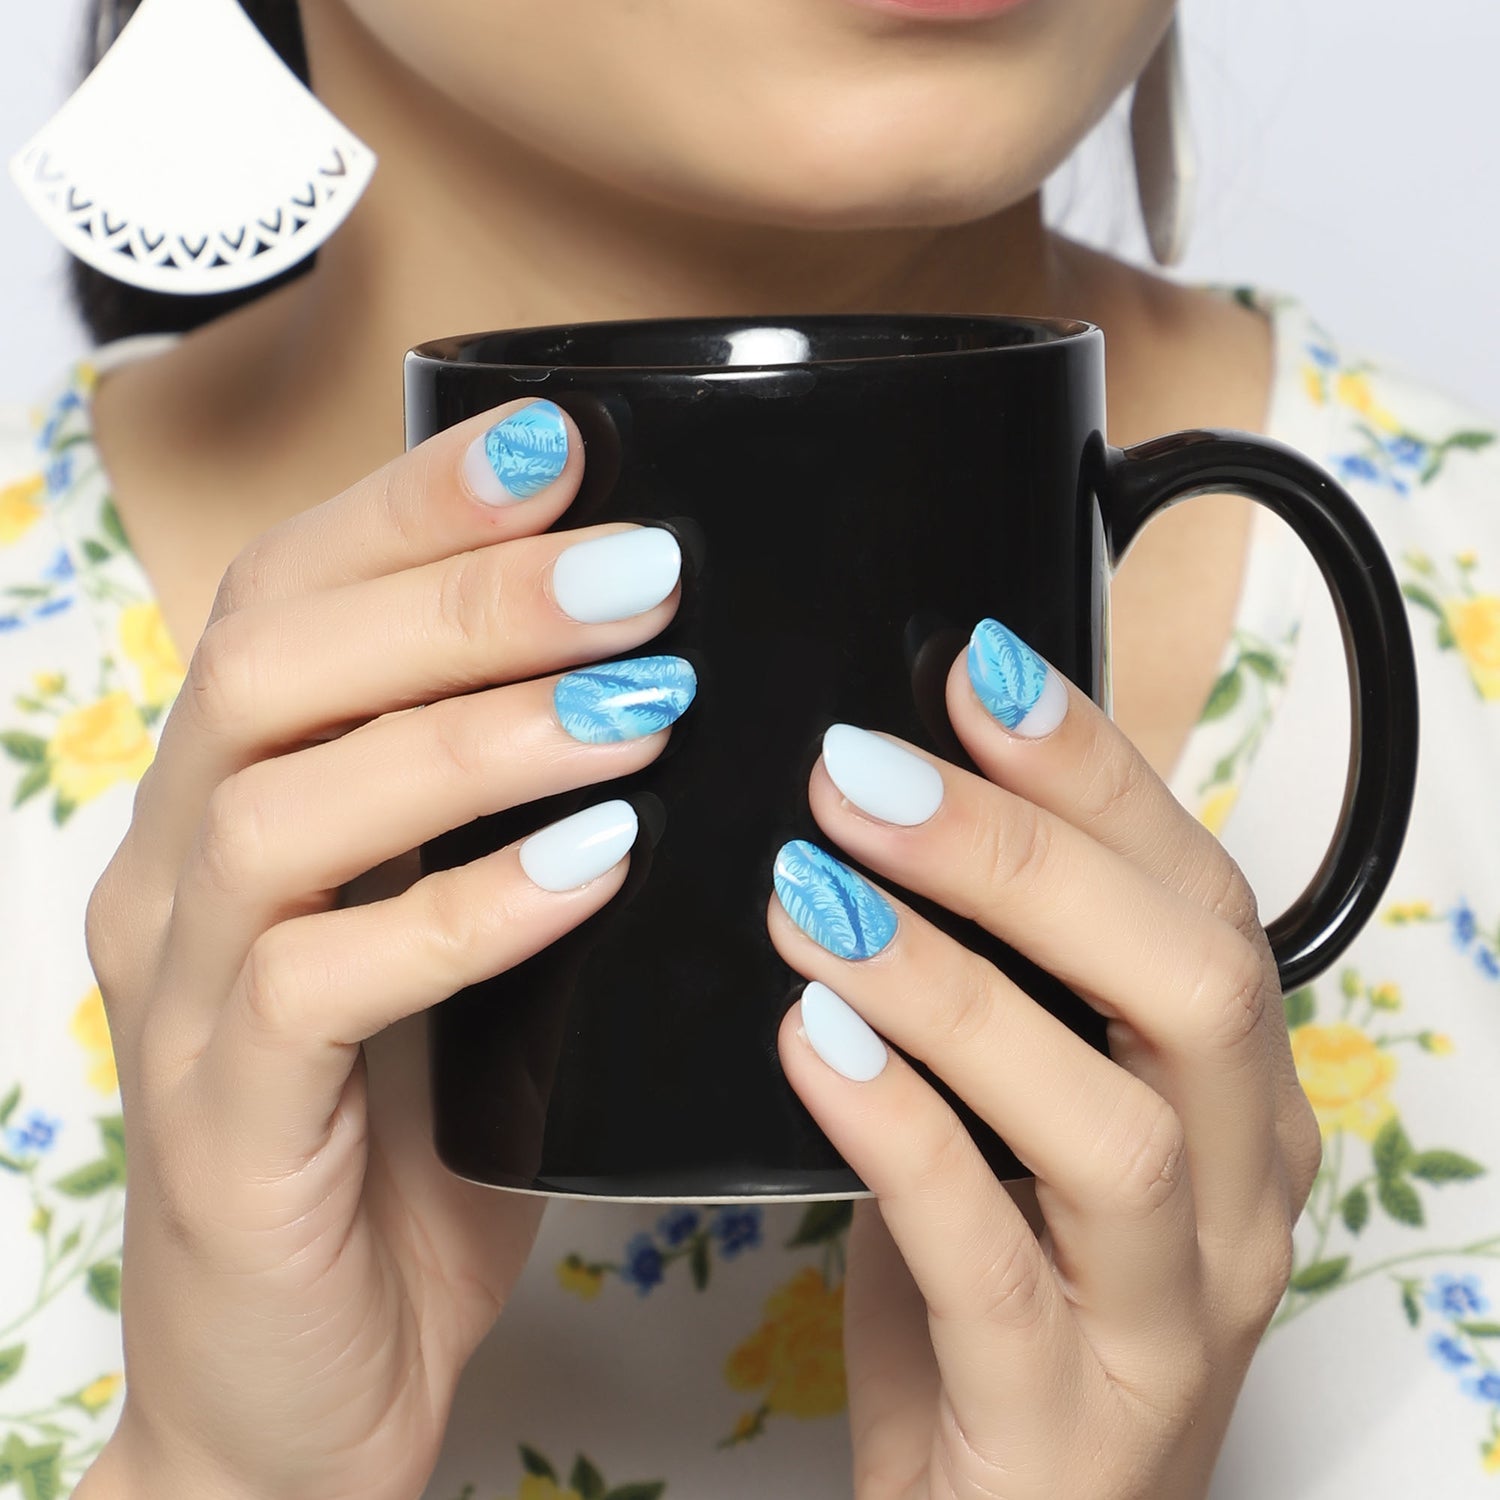 The 15 Best Blue Nail Polish Colors That Are So Flattering | Who What Wear